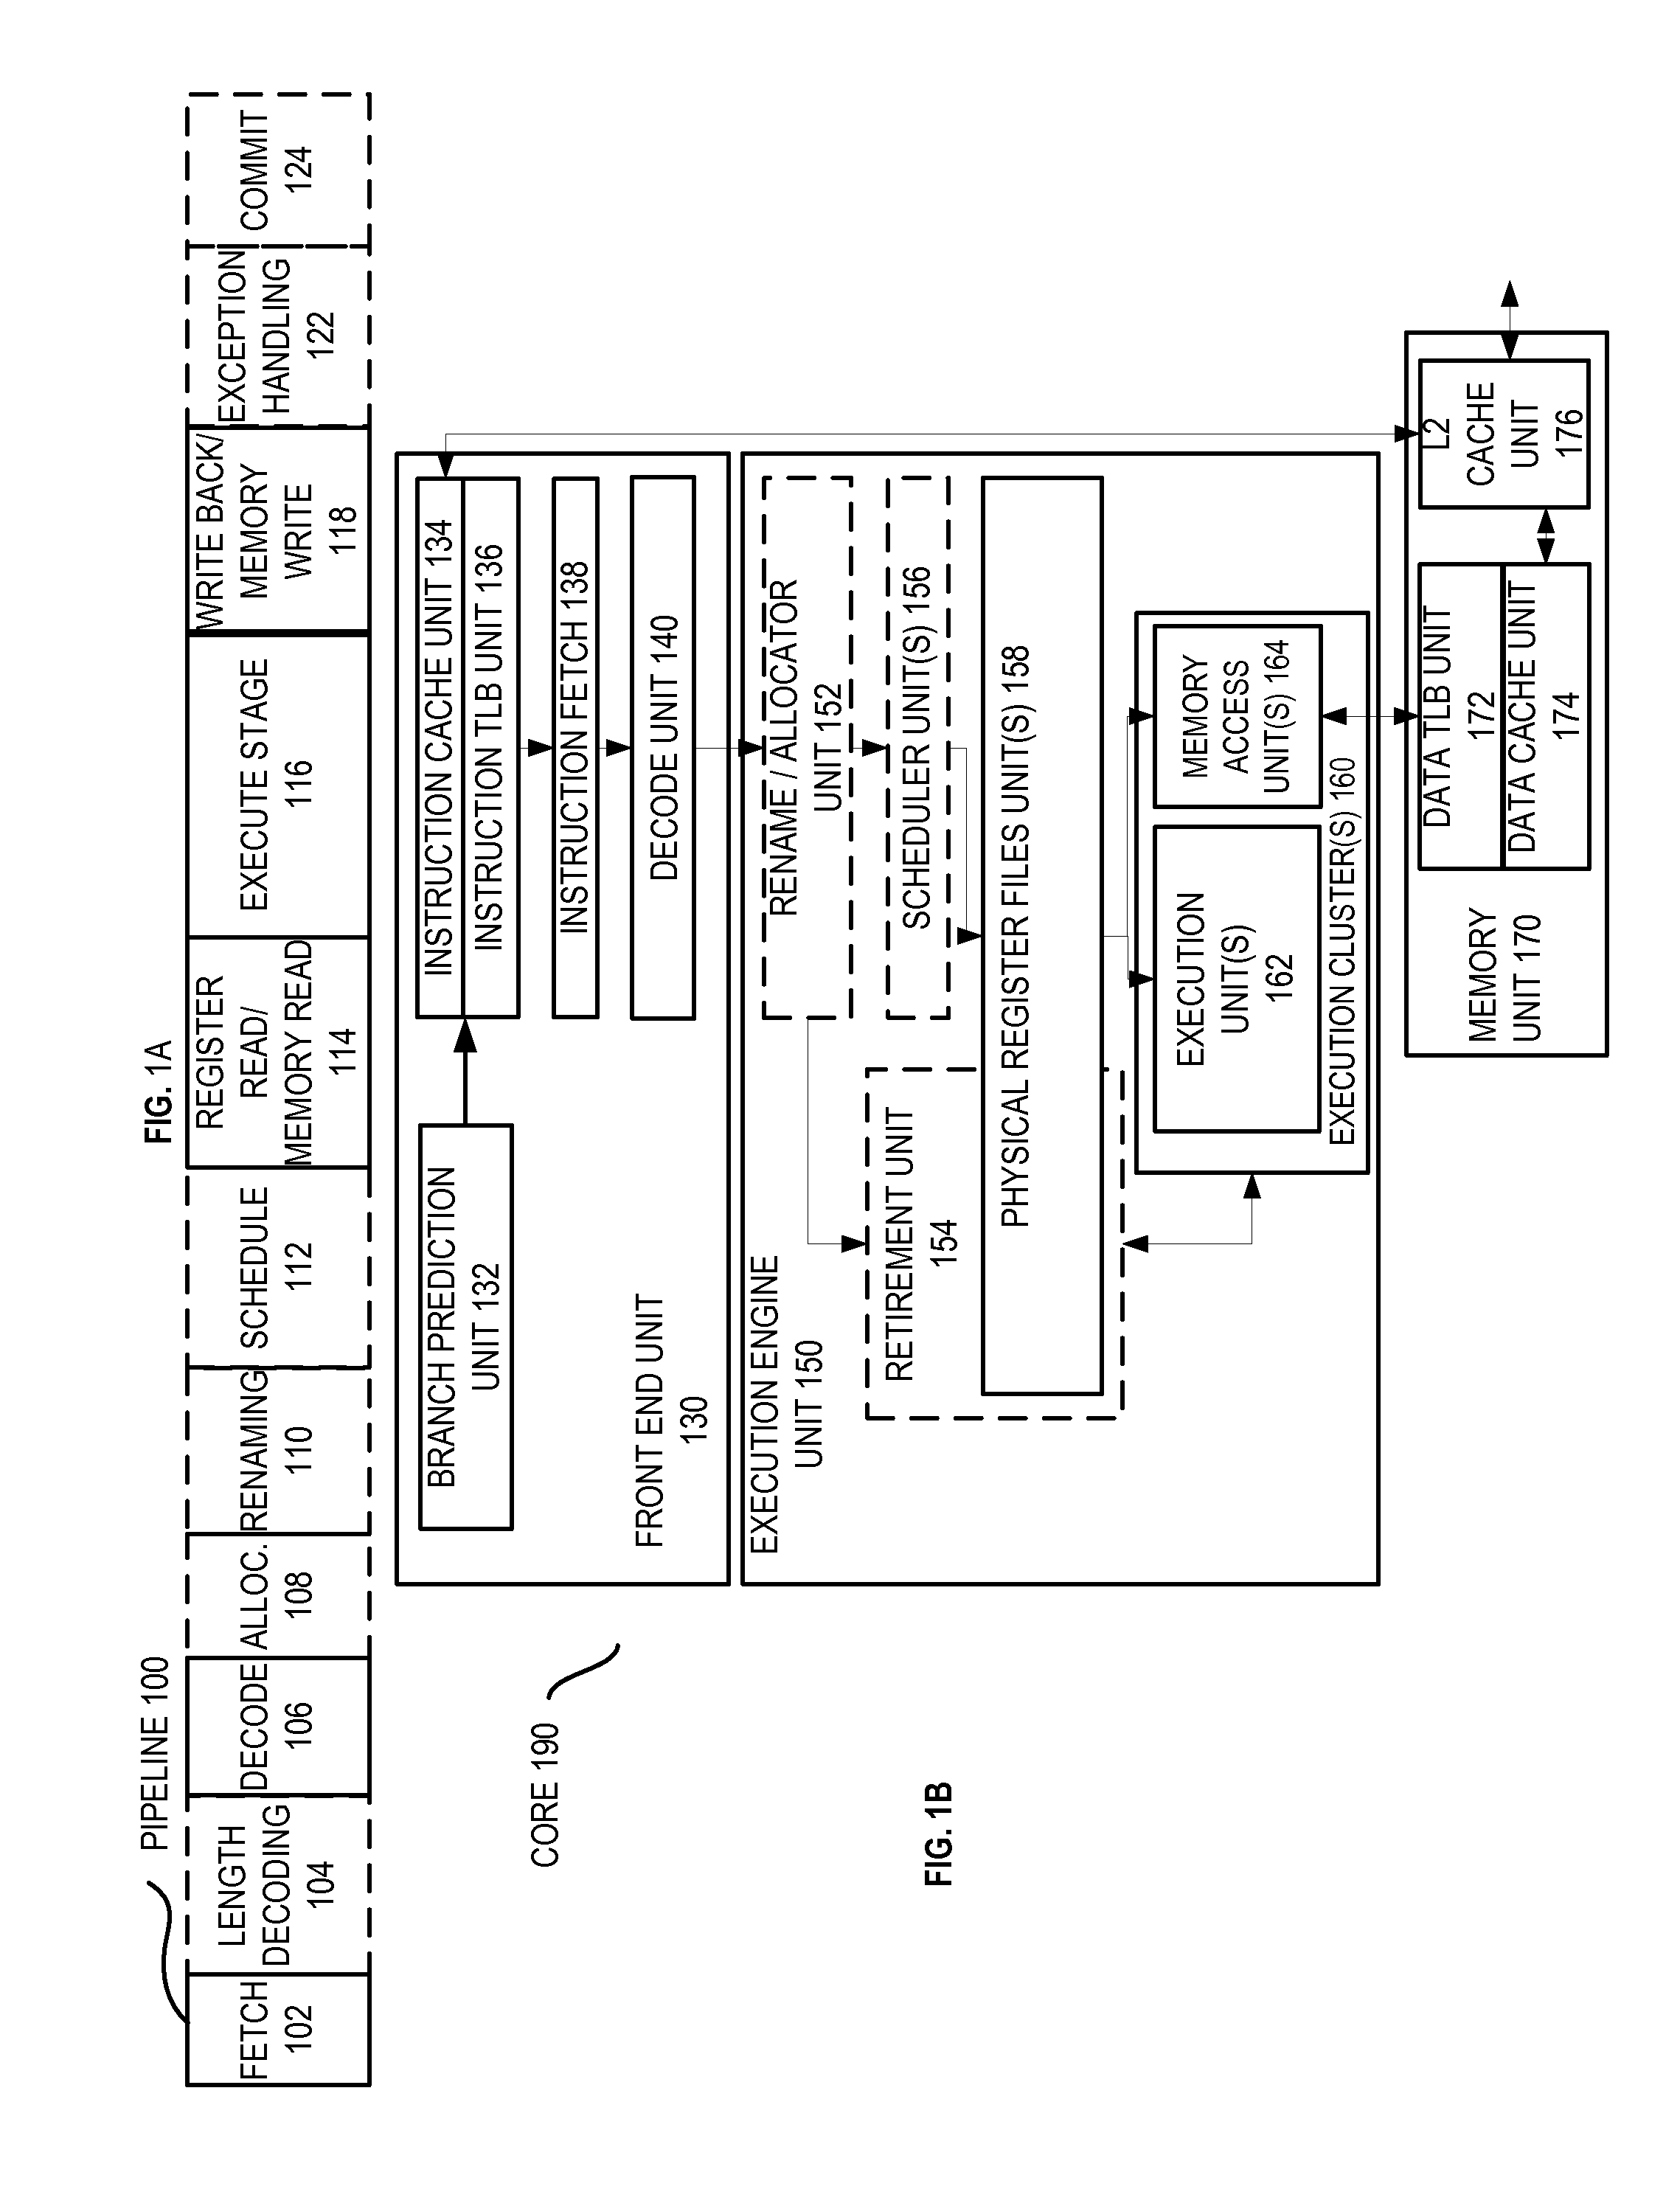 Method and apparatus for efficient, low power finite state transducer decoding